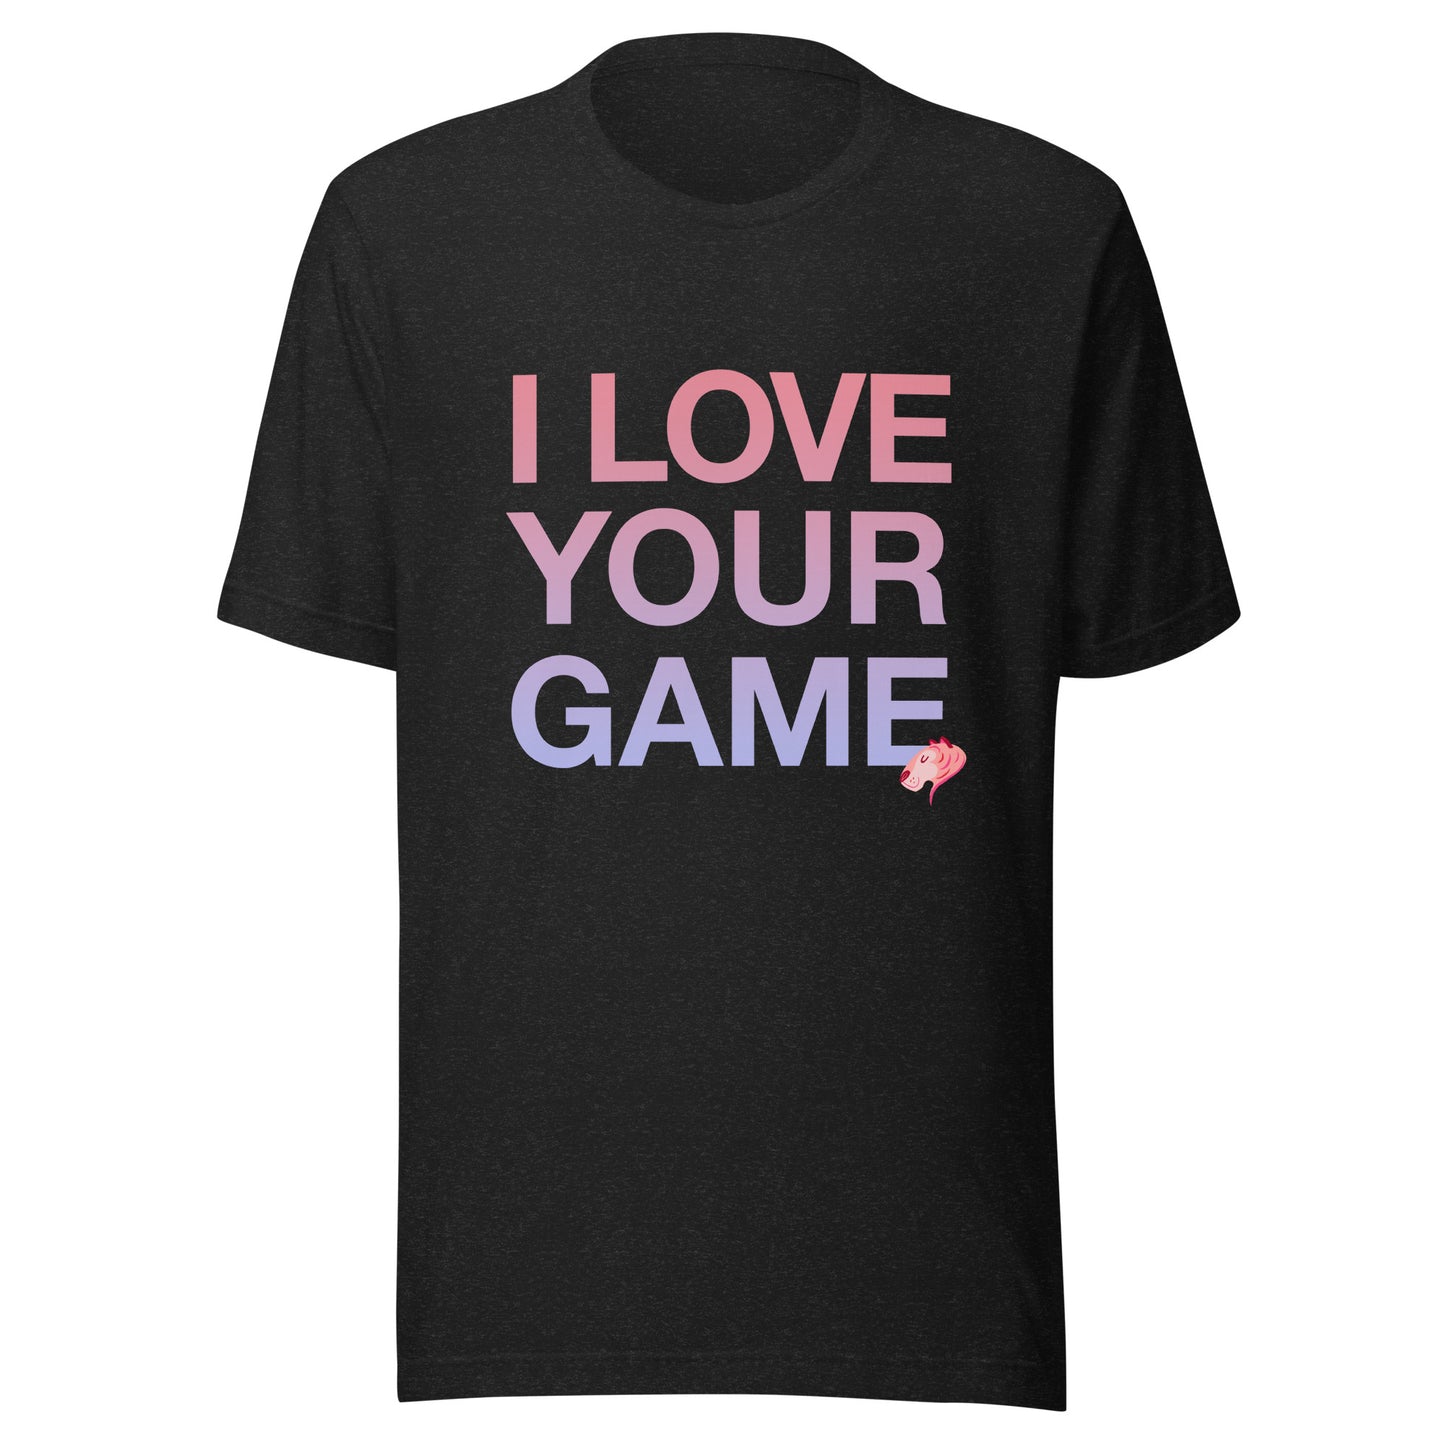 I LOVE YOUR GAME Unisex t-shirt